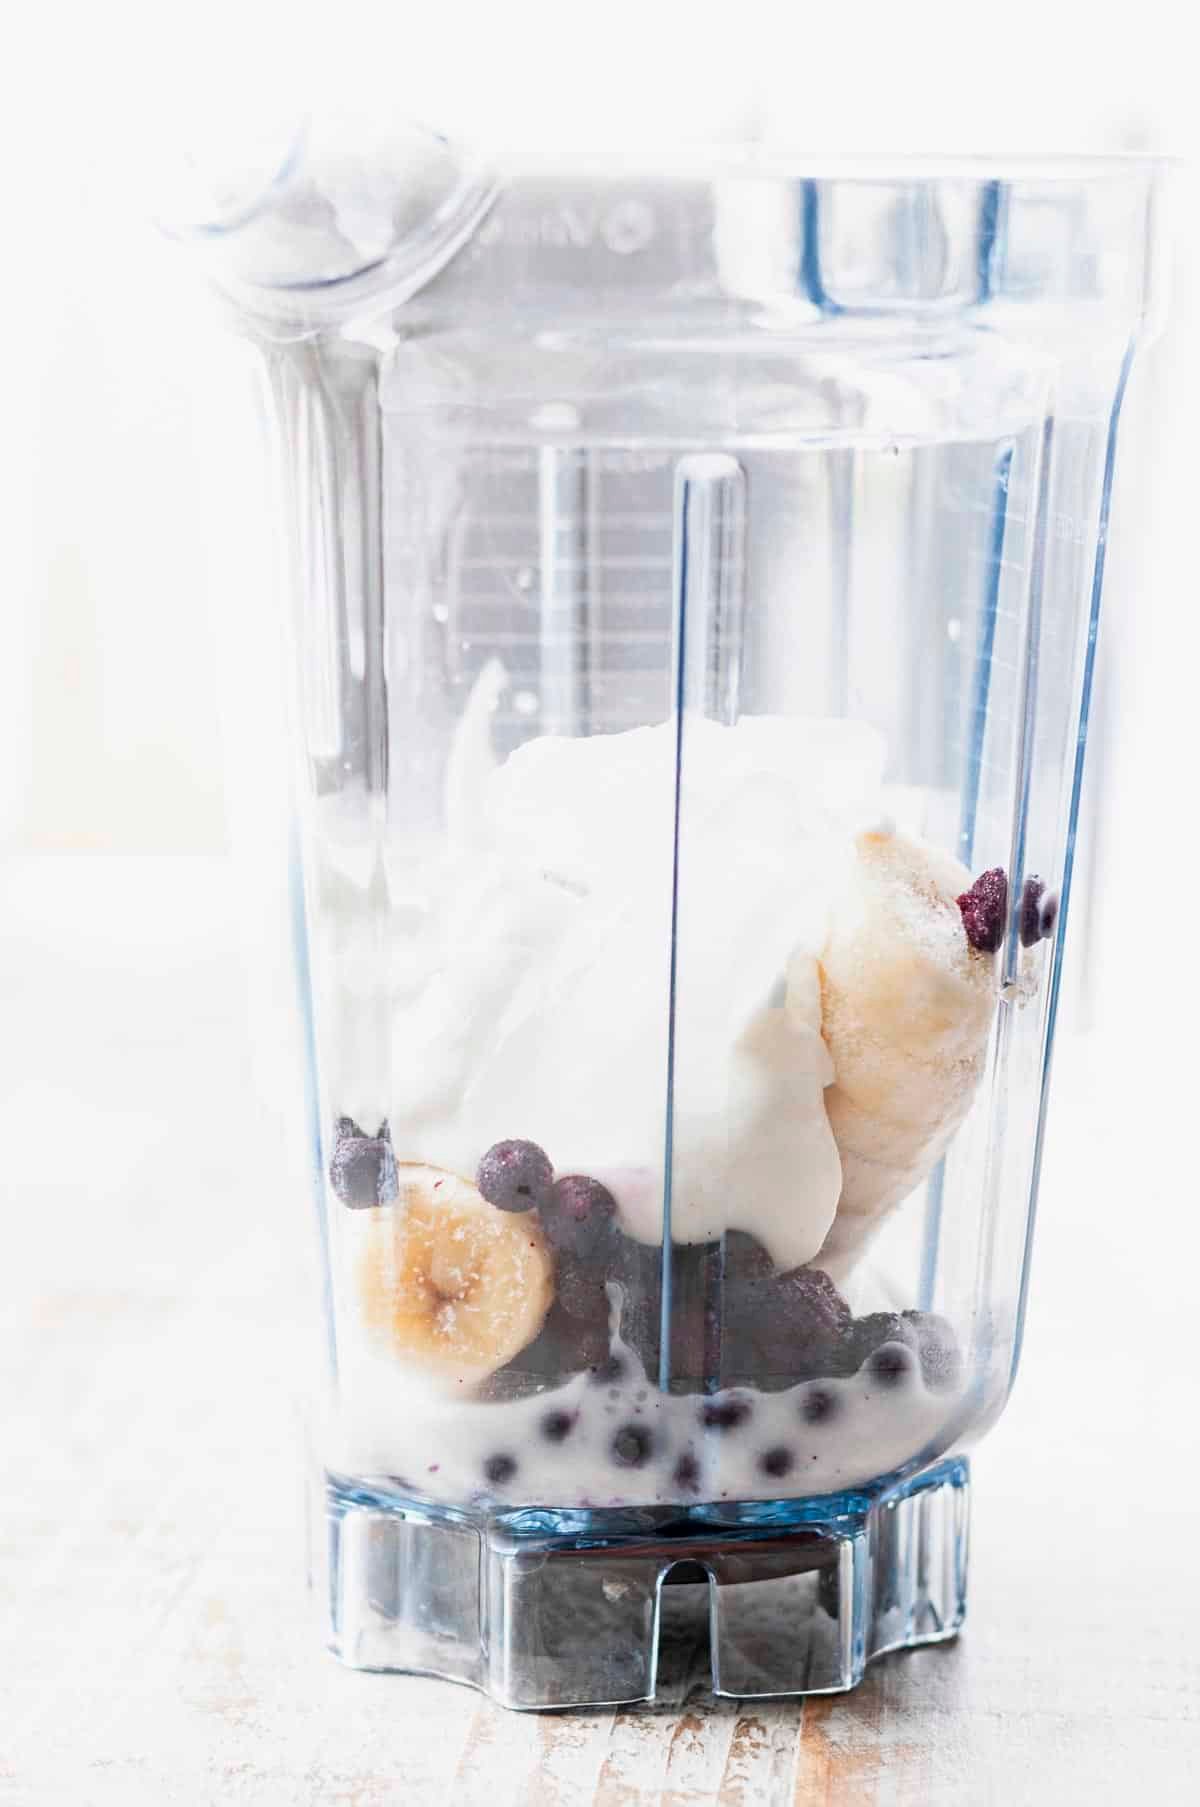 Ingredients for a blueberry banana smoothie in a blender.